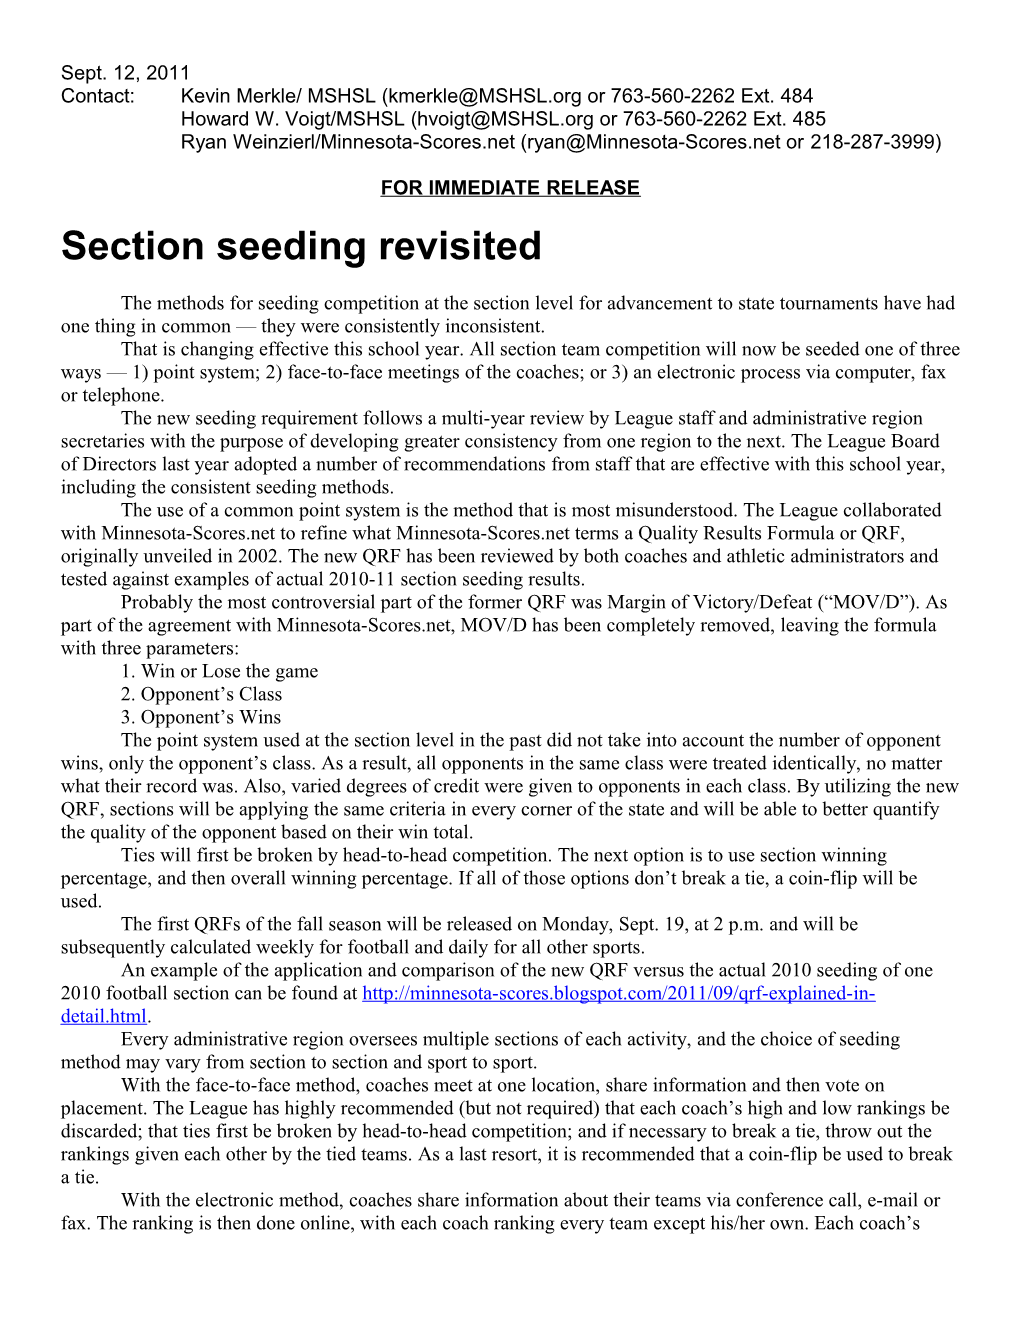 Section Seeding Revisited